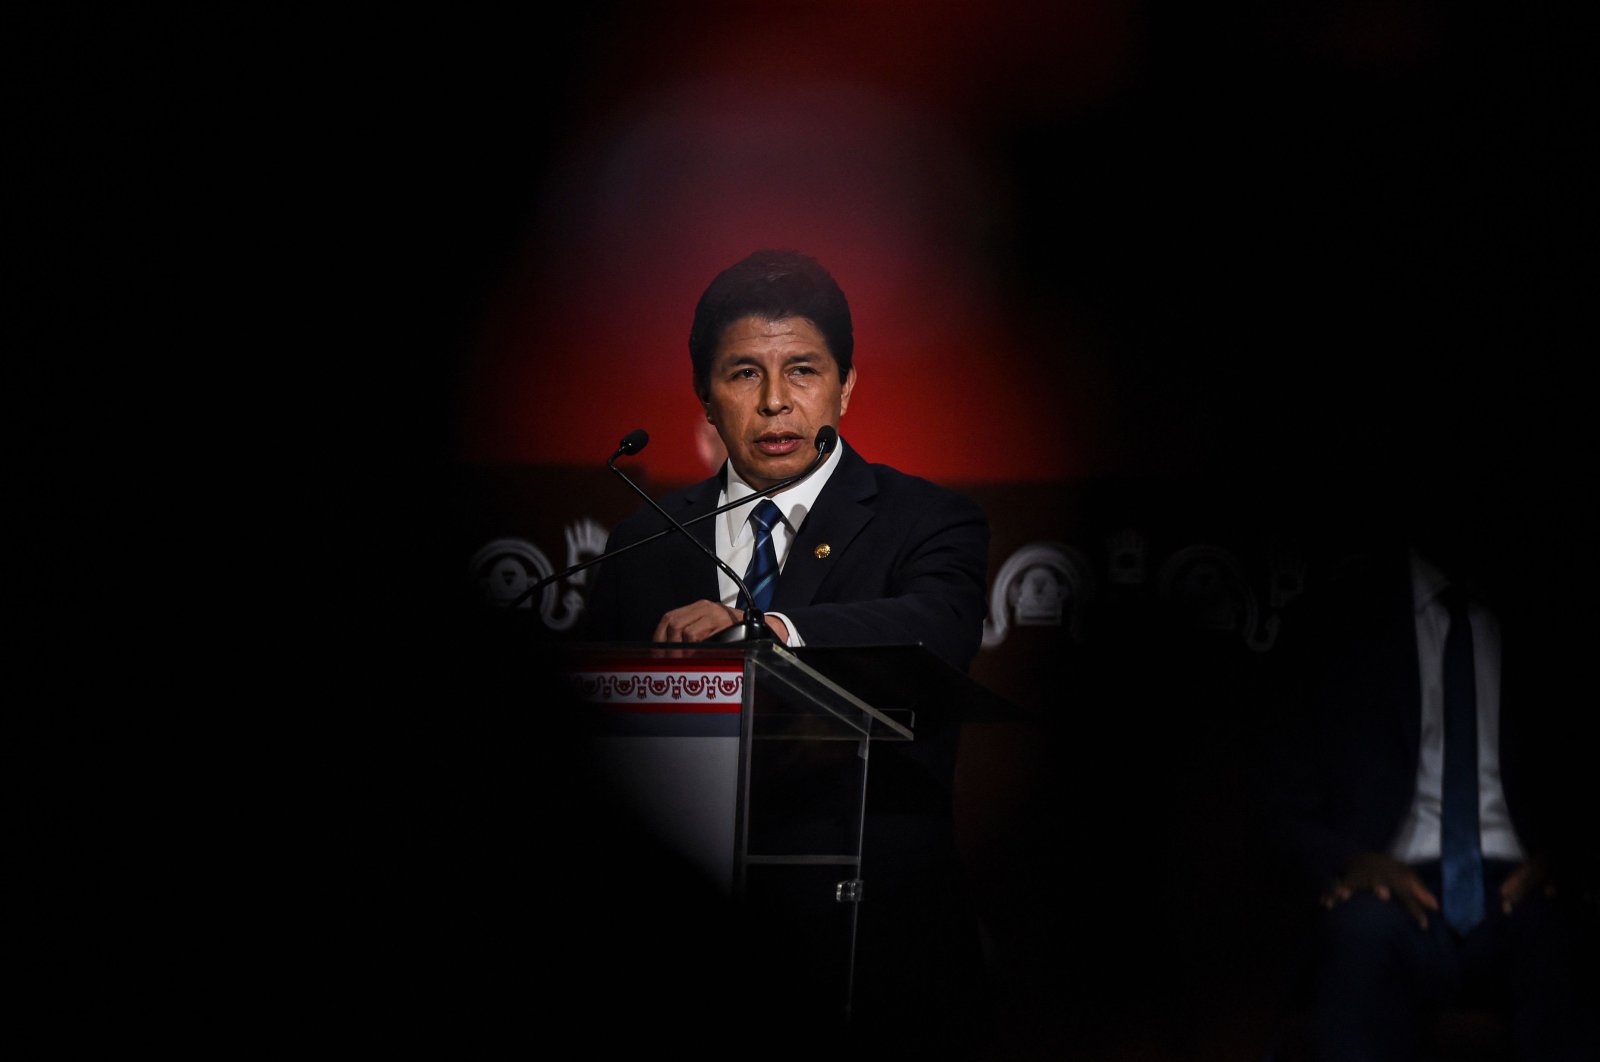 Peruvian President Pedro Castillo delivers a speech during the inauguration of the 52nd General Assembly of the OAS in Lima, Peru, Oct. 5, 2022. (AFP Photo)